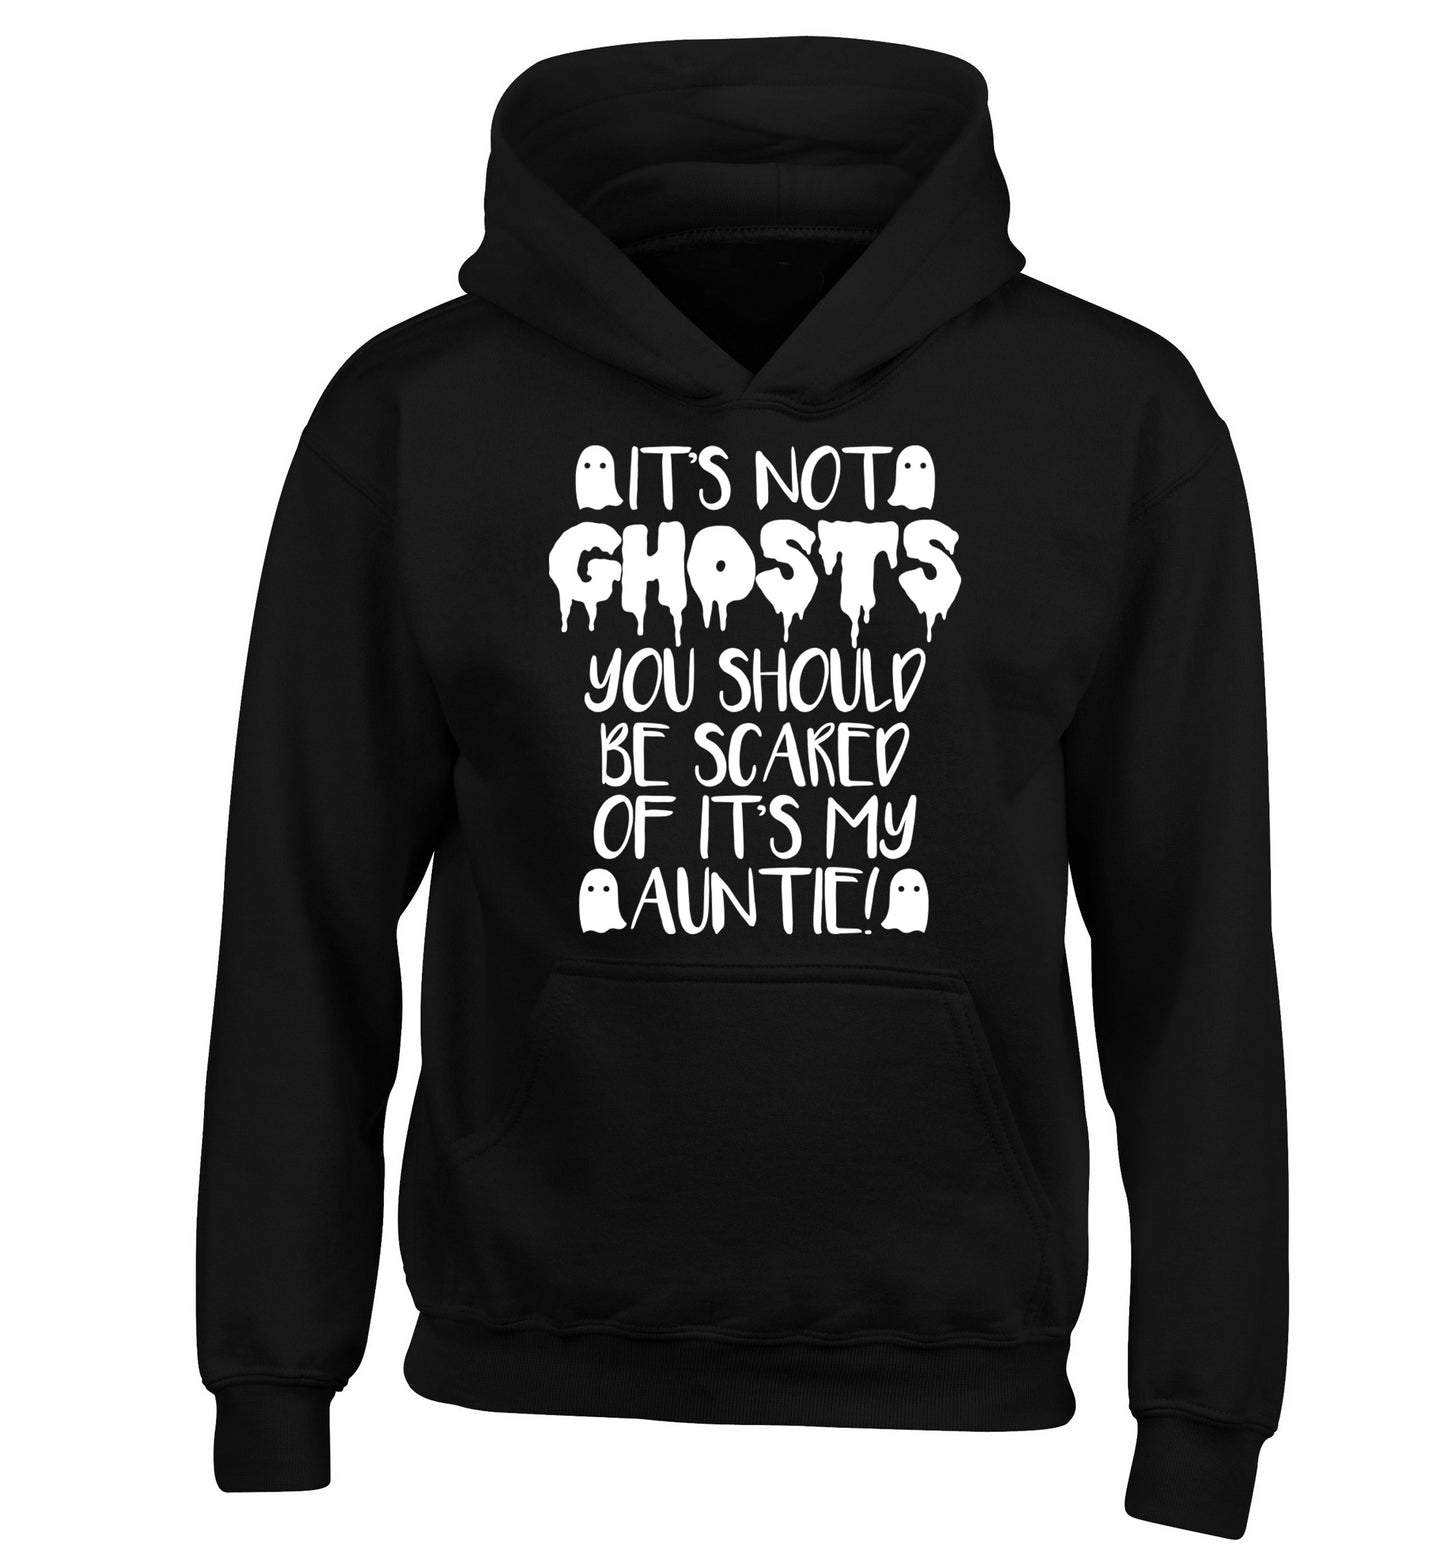 It's not ghosts you should be scared of it's my auntie! children's black hoodie 12-14 Years